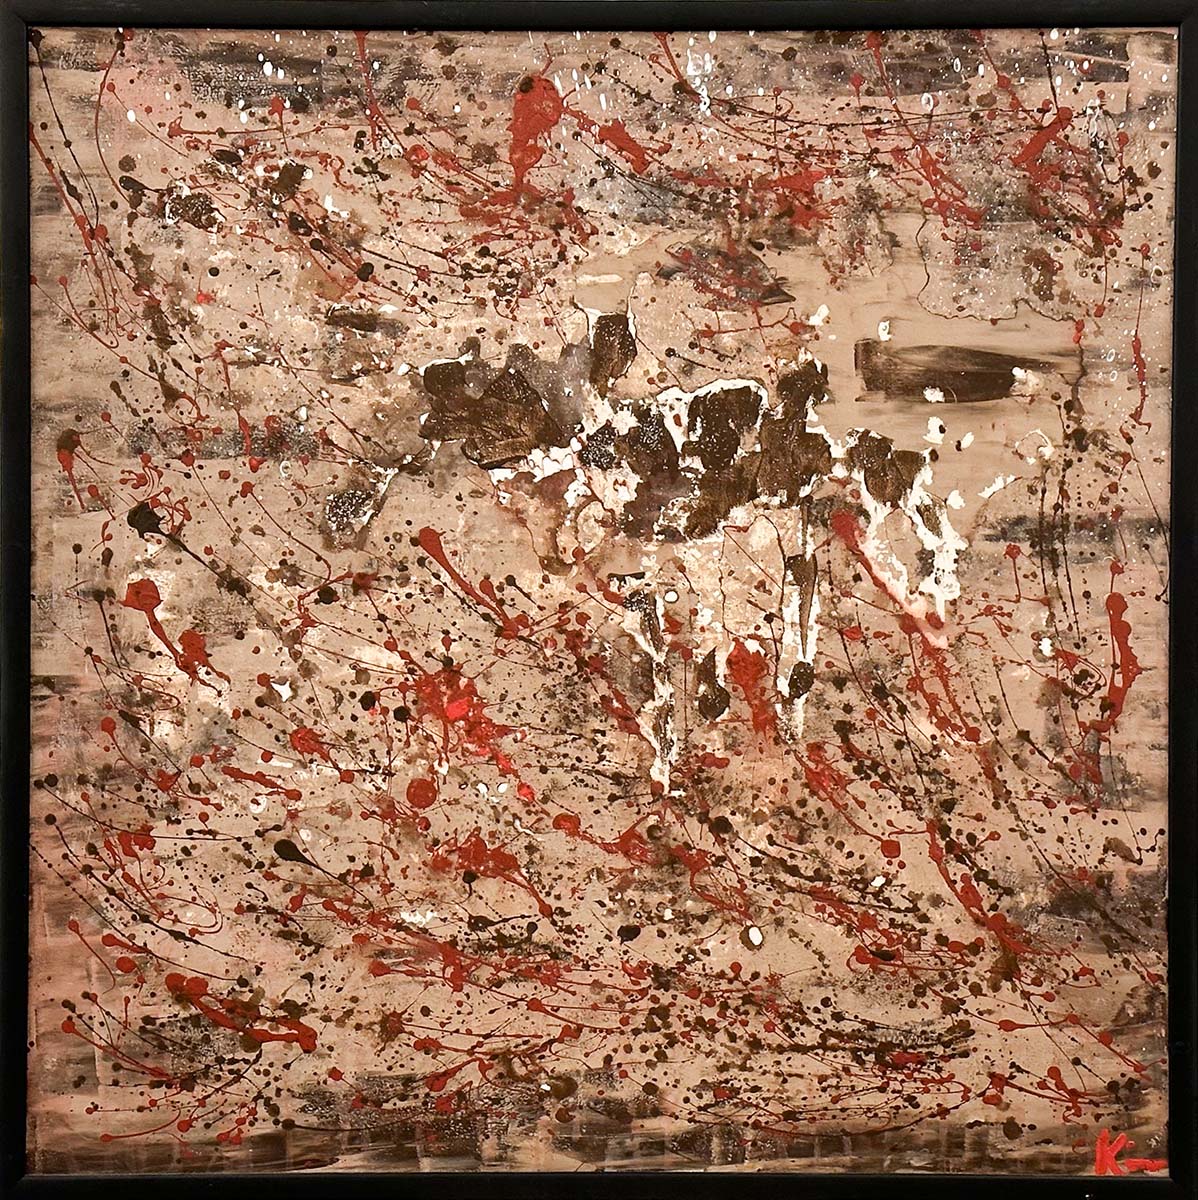 Abstract Art. Title: Treading Lightly, Mixed Media, 30x30 inches by Contemporary Canadian Artist G Kim Hinkson.